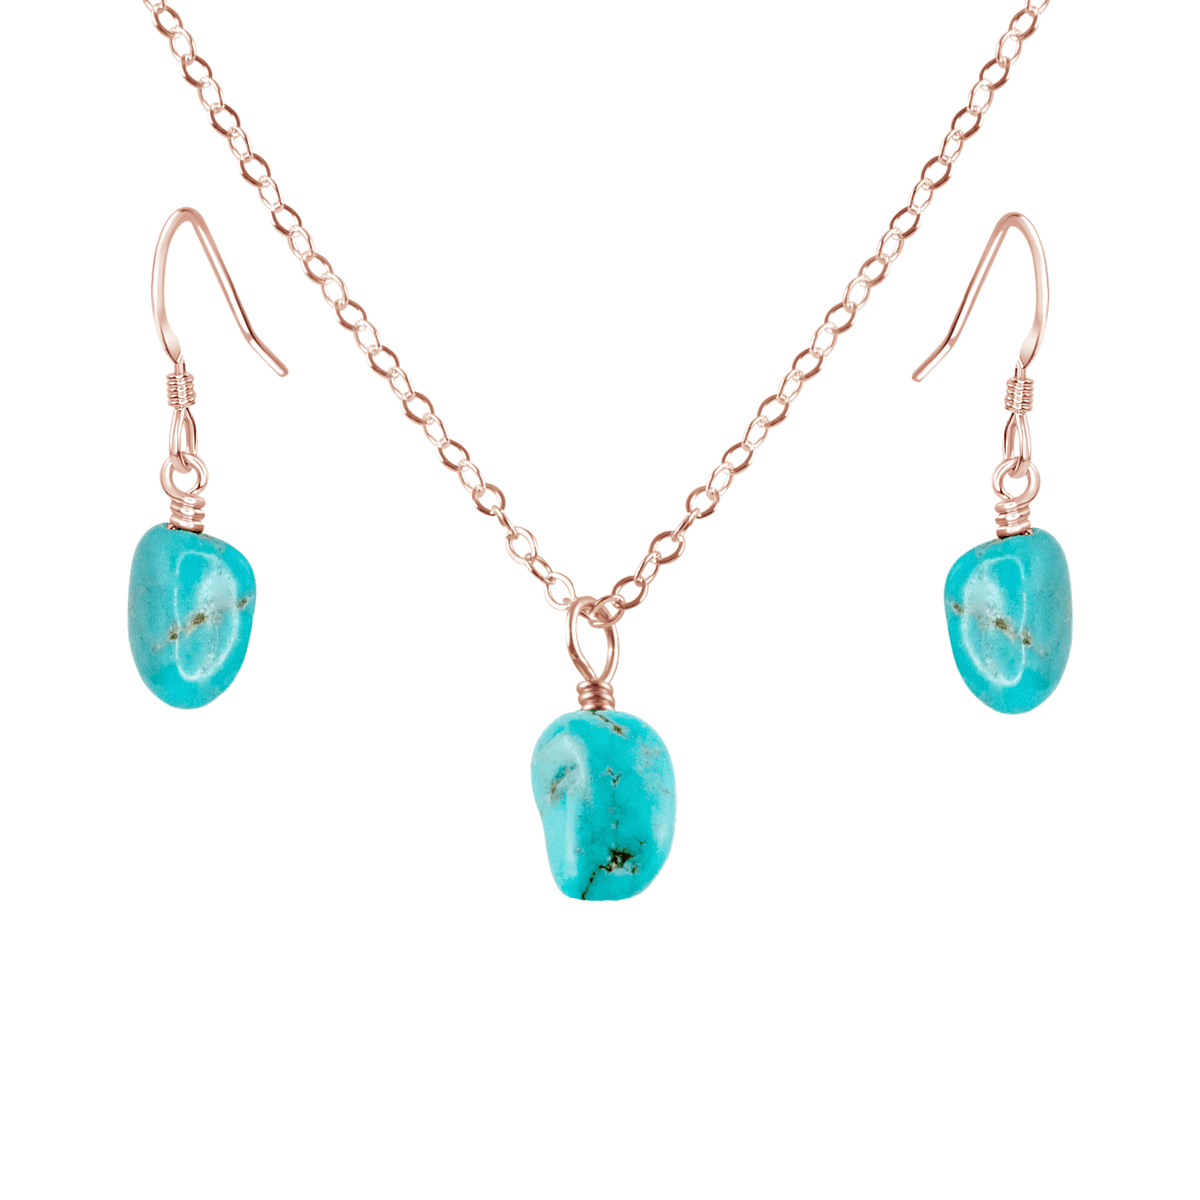 Raw Turquoise Crystal Earrings & Necklace Set - Raw Turquoise Crystal Earrings & Necklace Set - 14k Rose Gold Fill - Luna Tide Handmade Crystal Jewellery